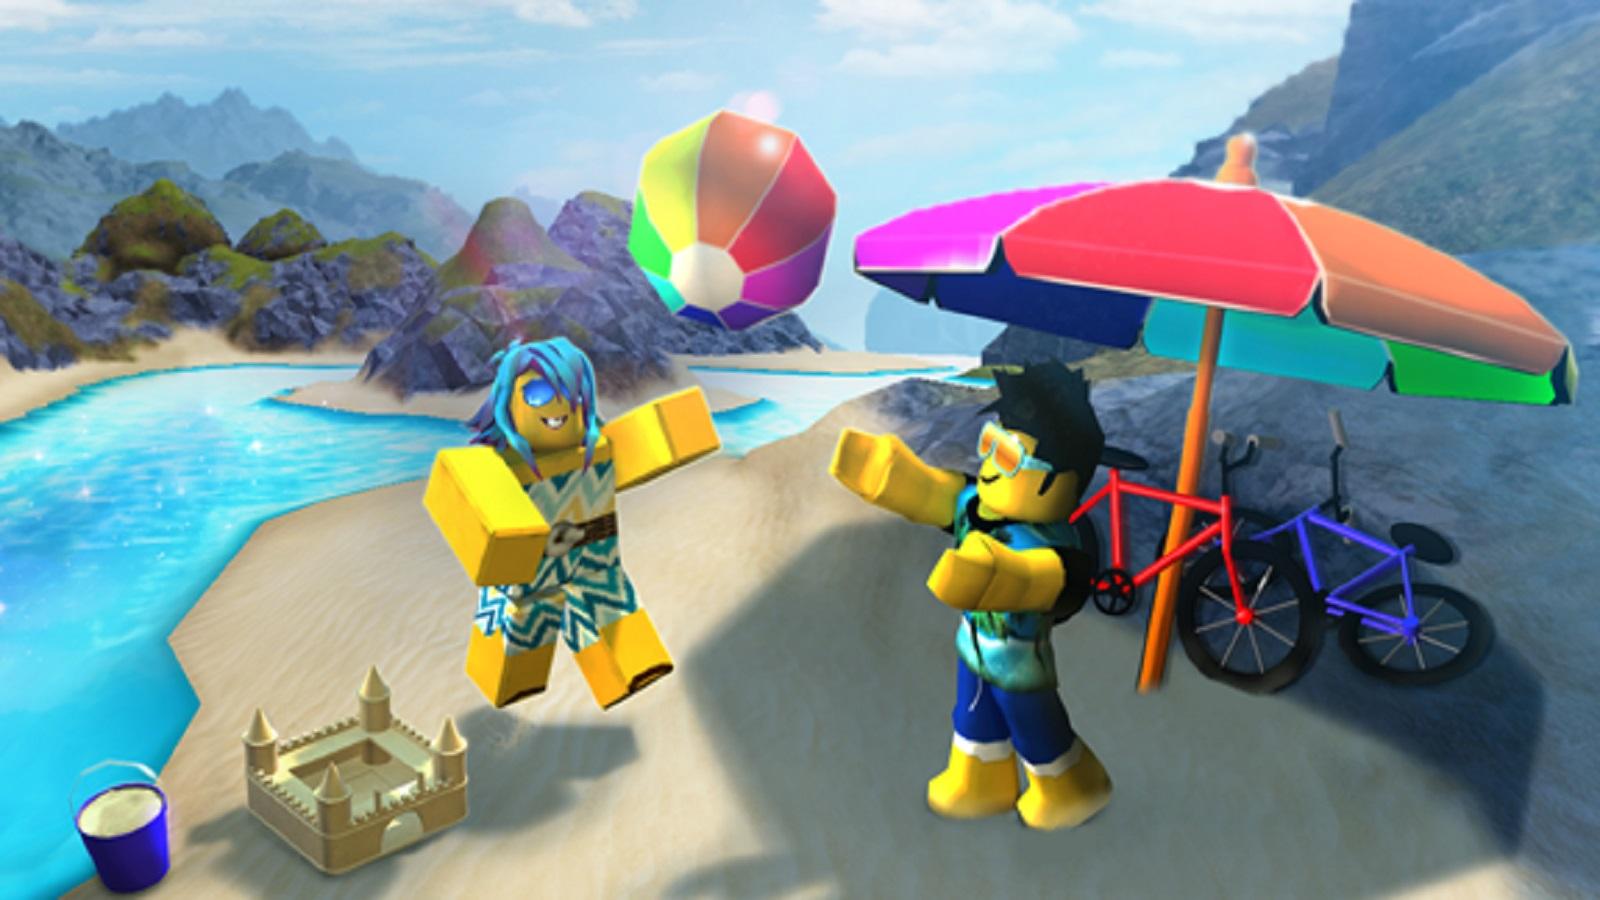 in-game screenshot from Roblox 